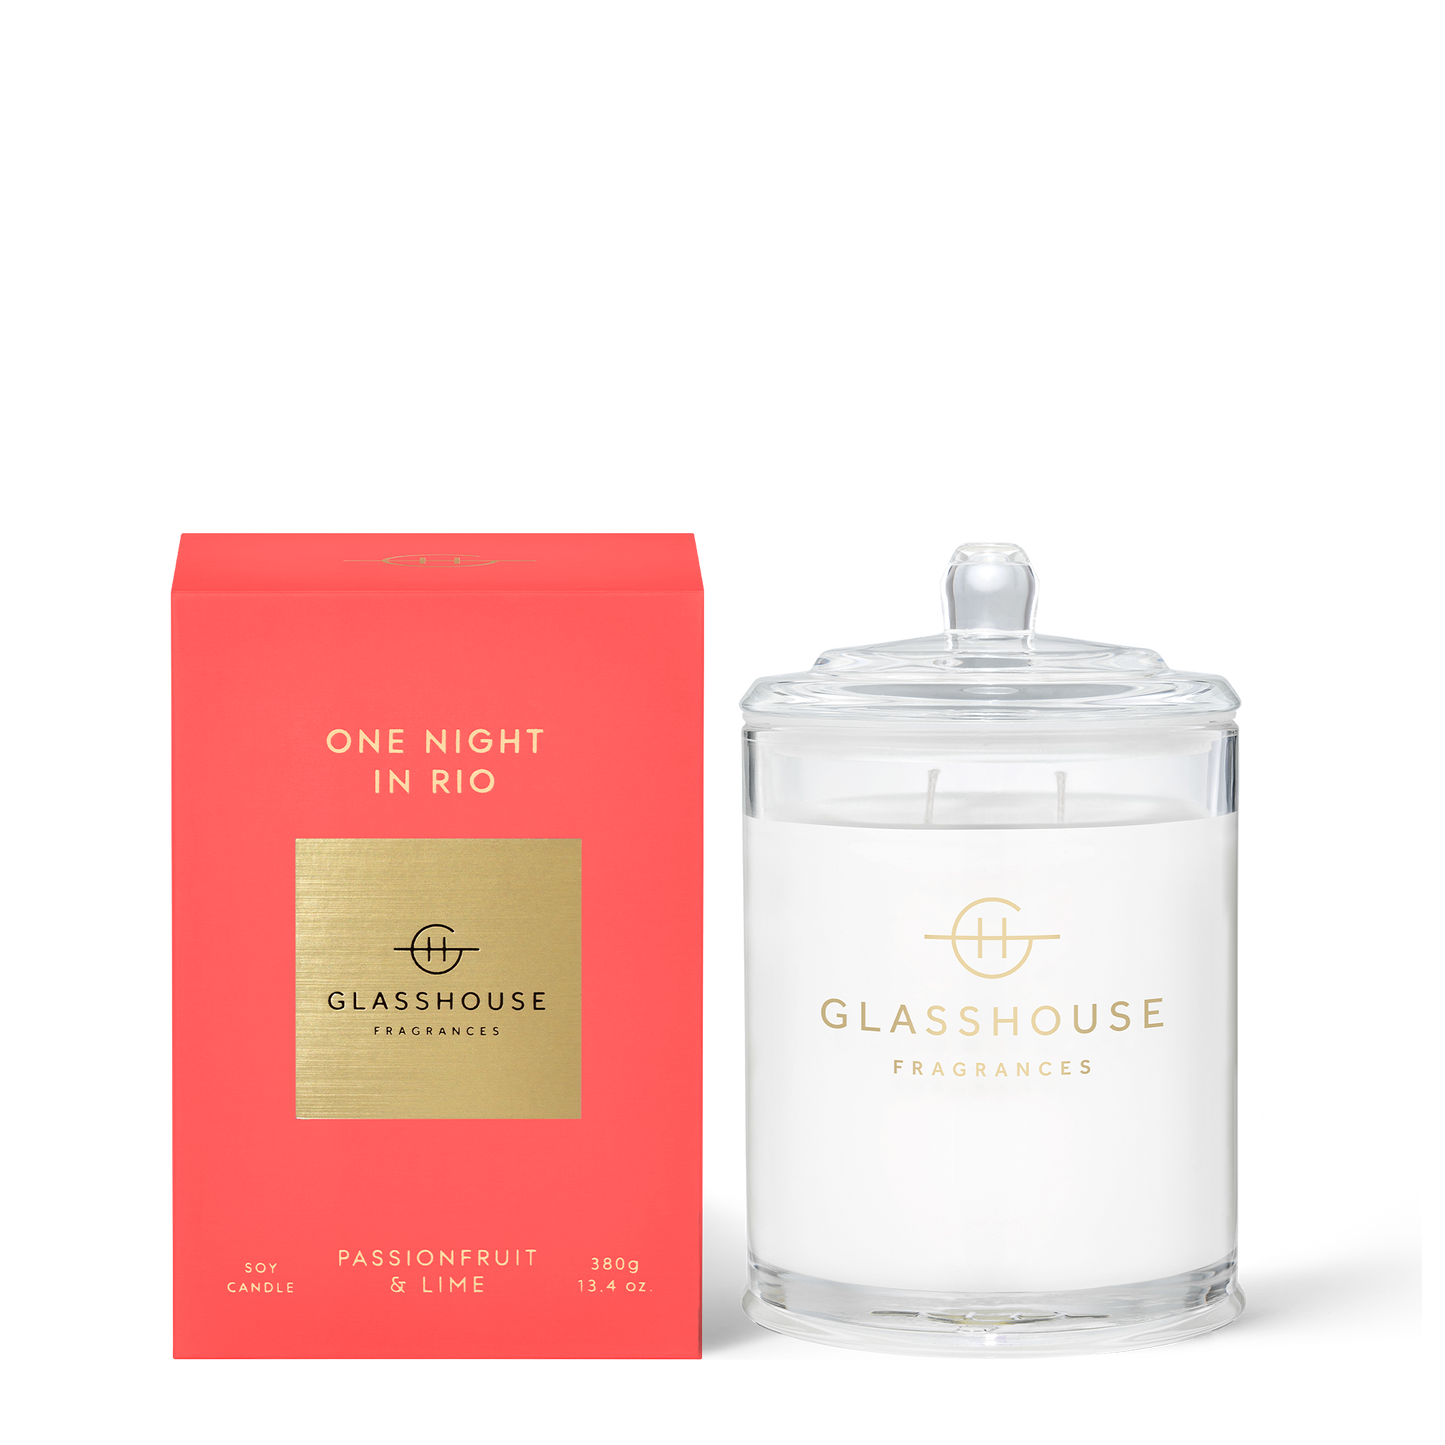 One Night In Rio 380g Soy Candle - Glasshouse Fragrances